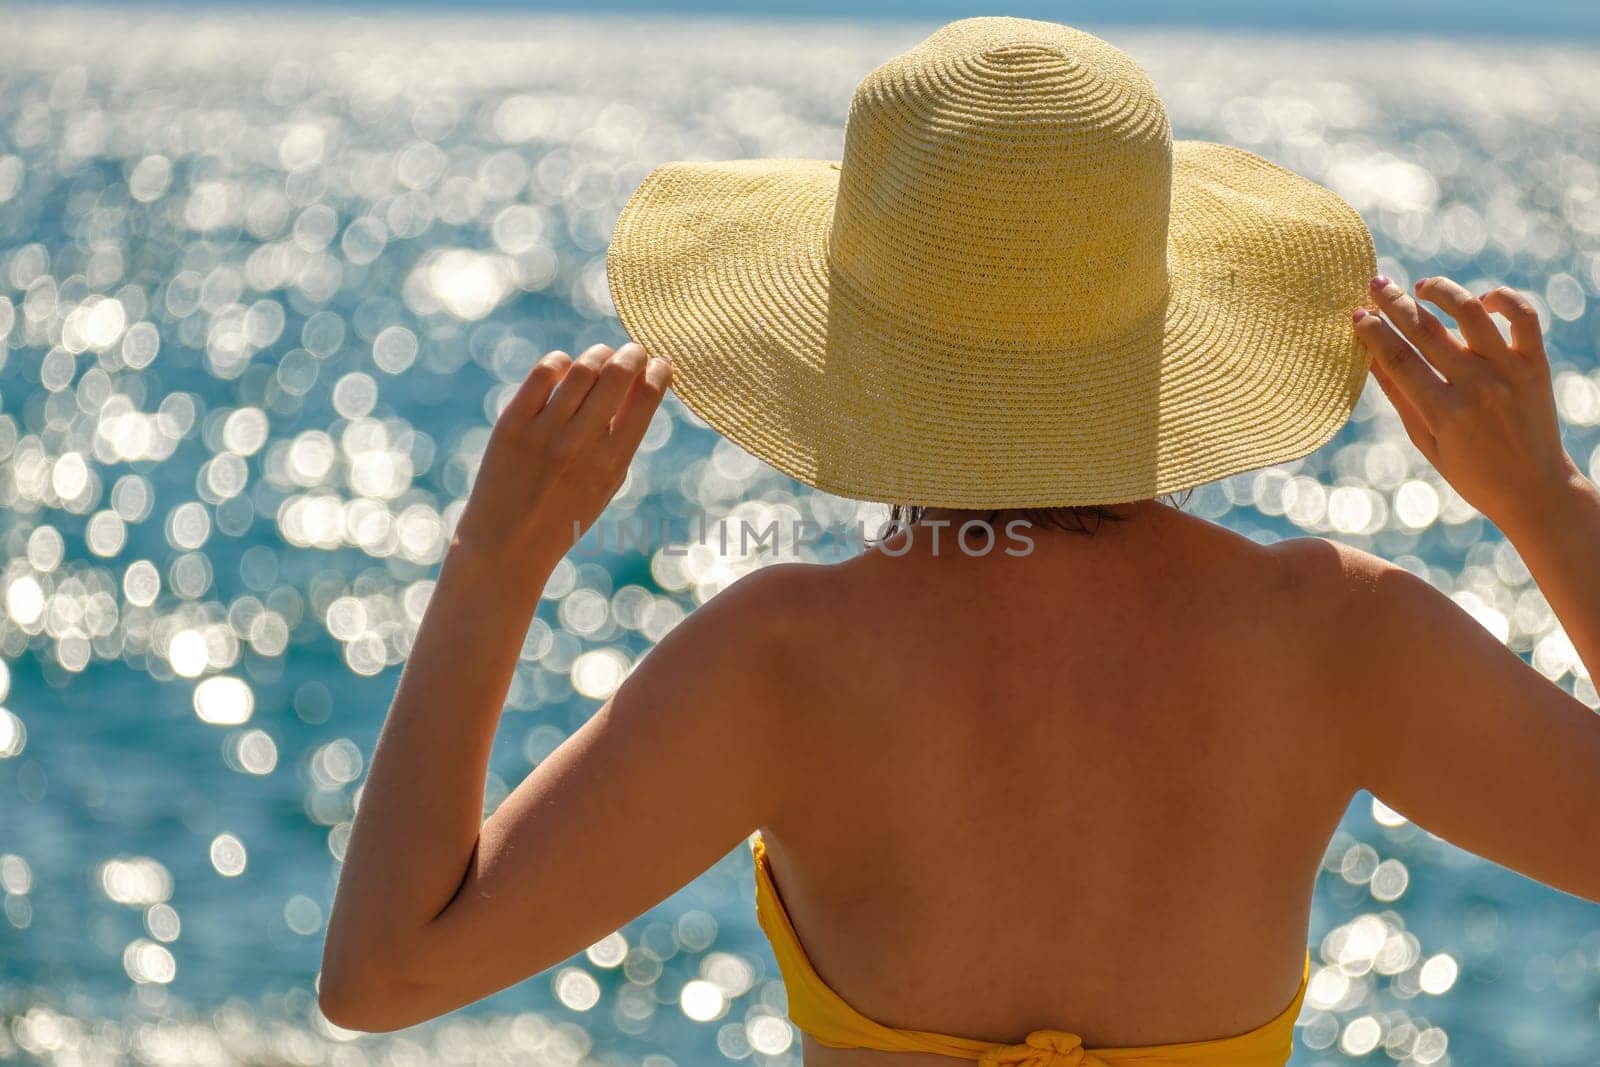 Young woman in a yellow bikini holding on to her hat and looking at the sea.